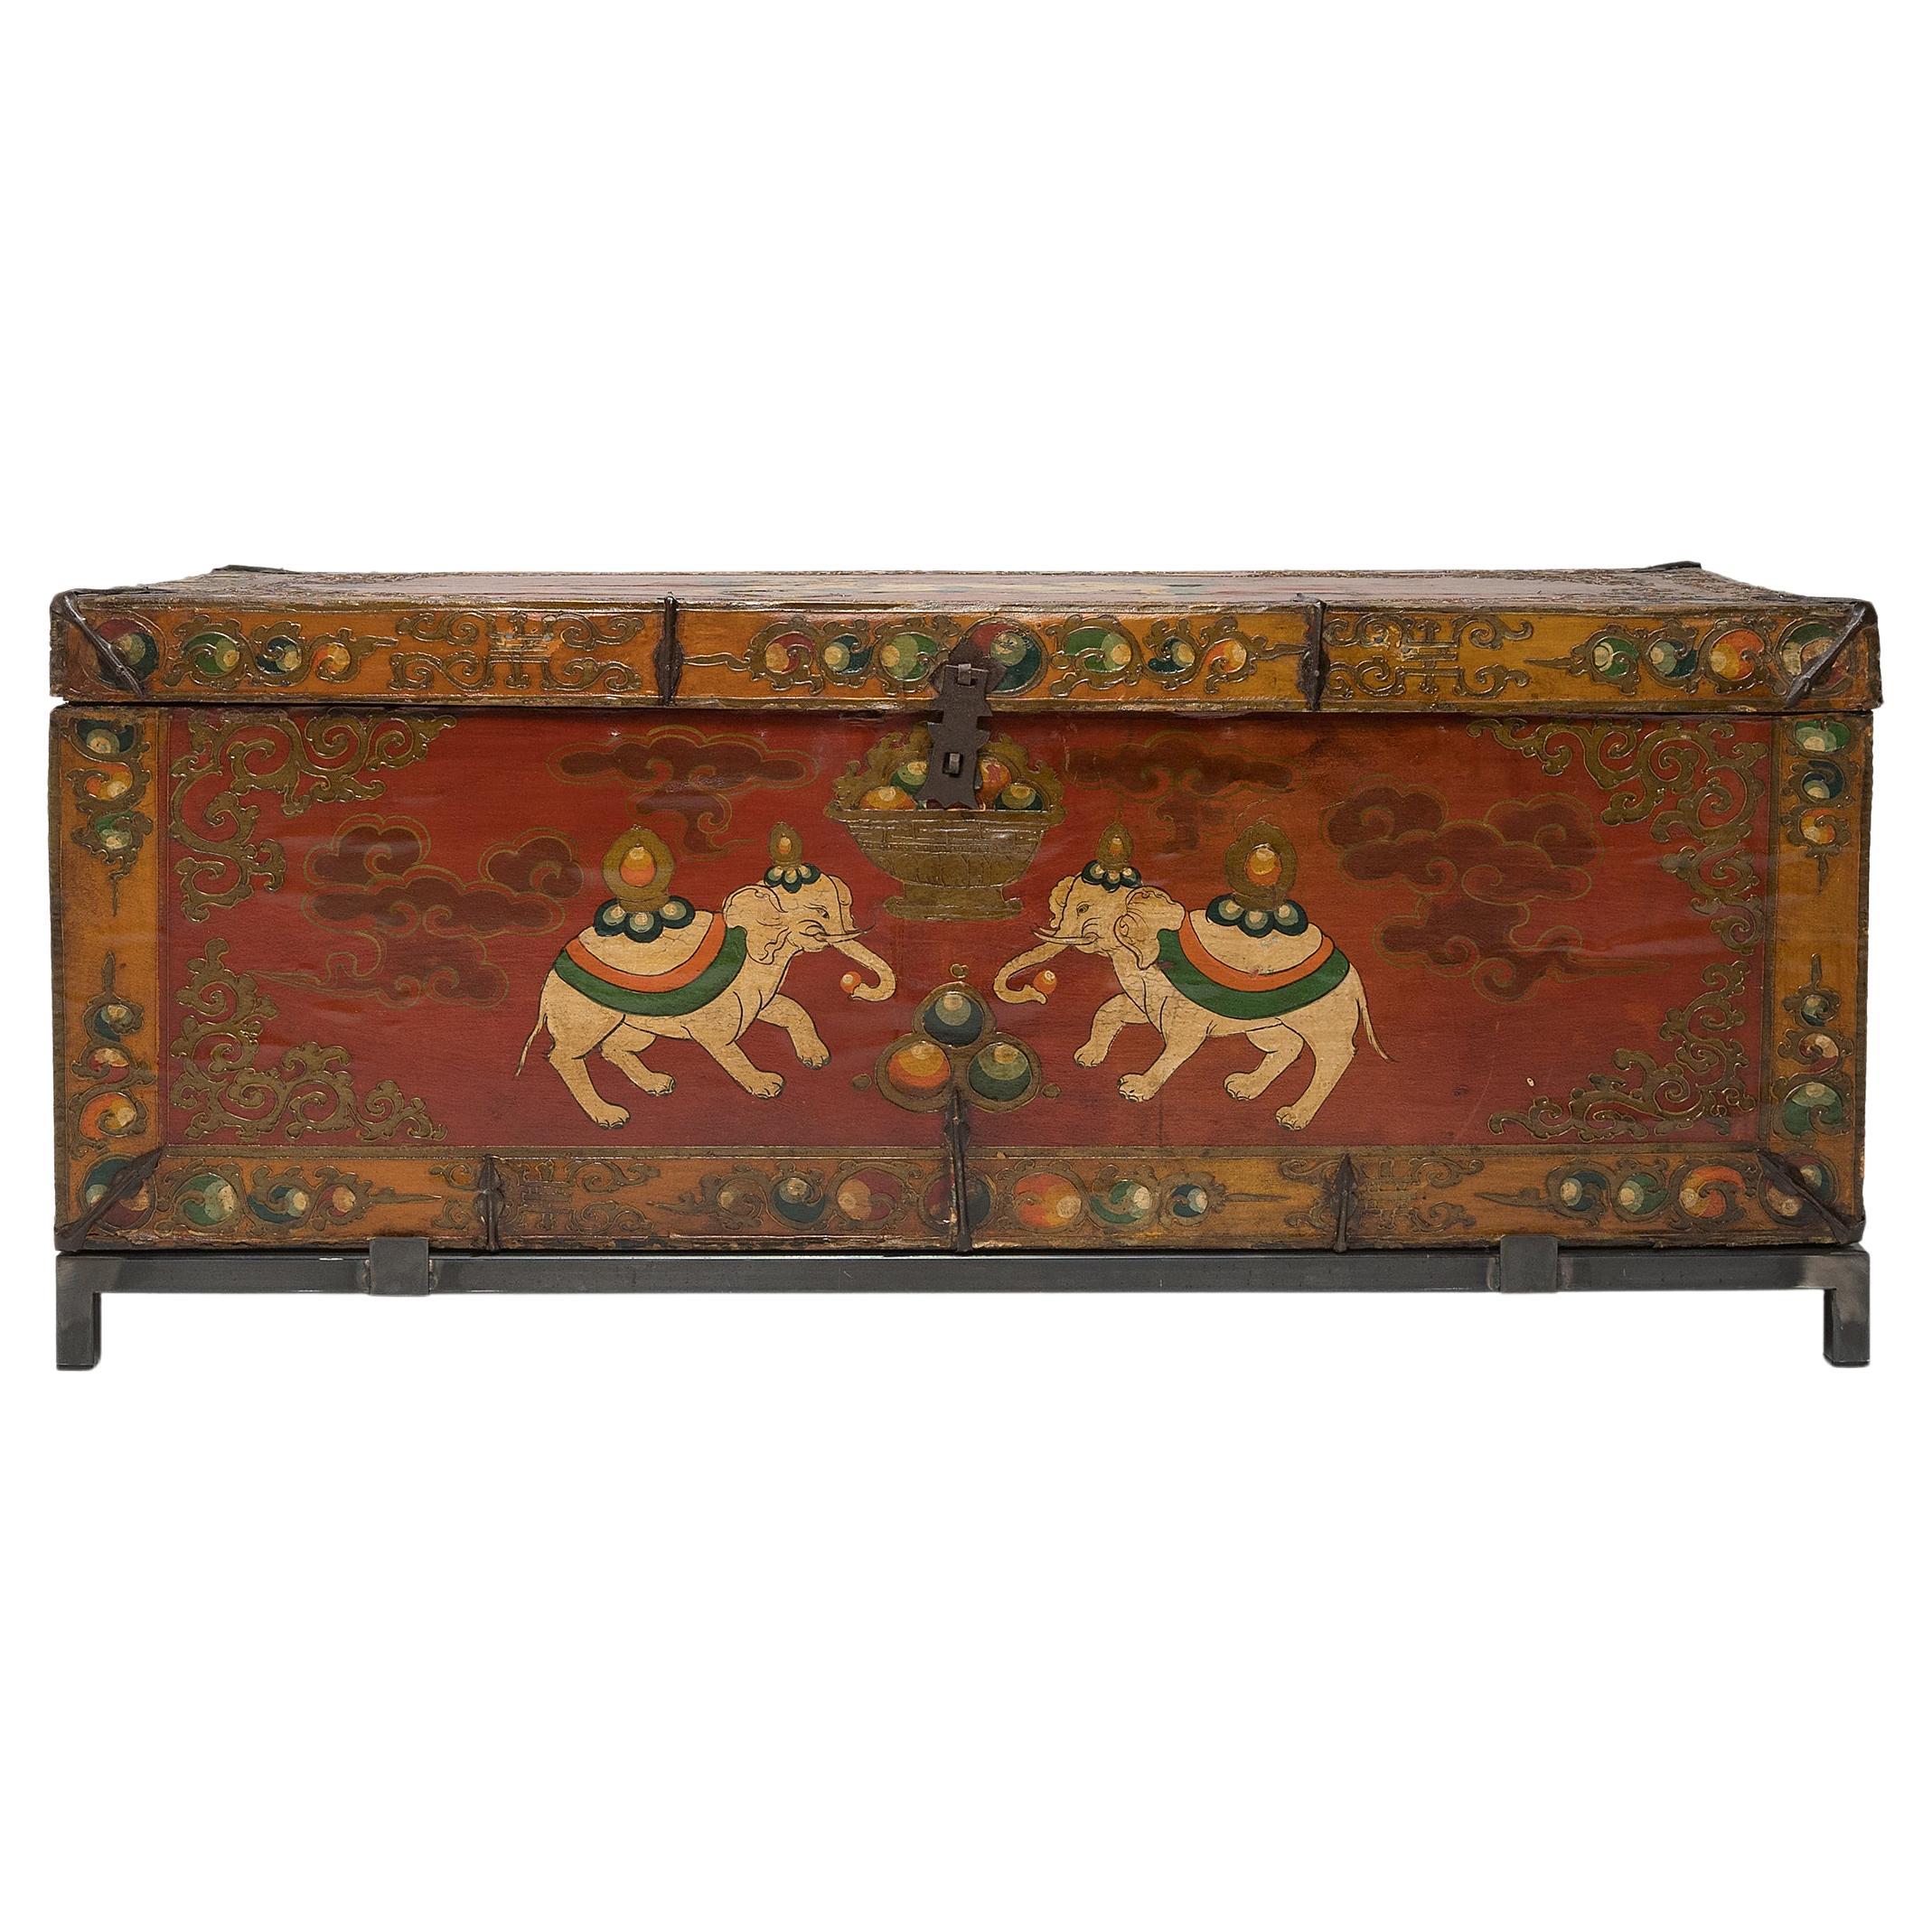 Chinese Painted Elephant Trunk Table, C. 1900